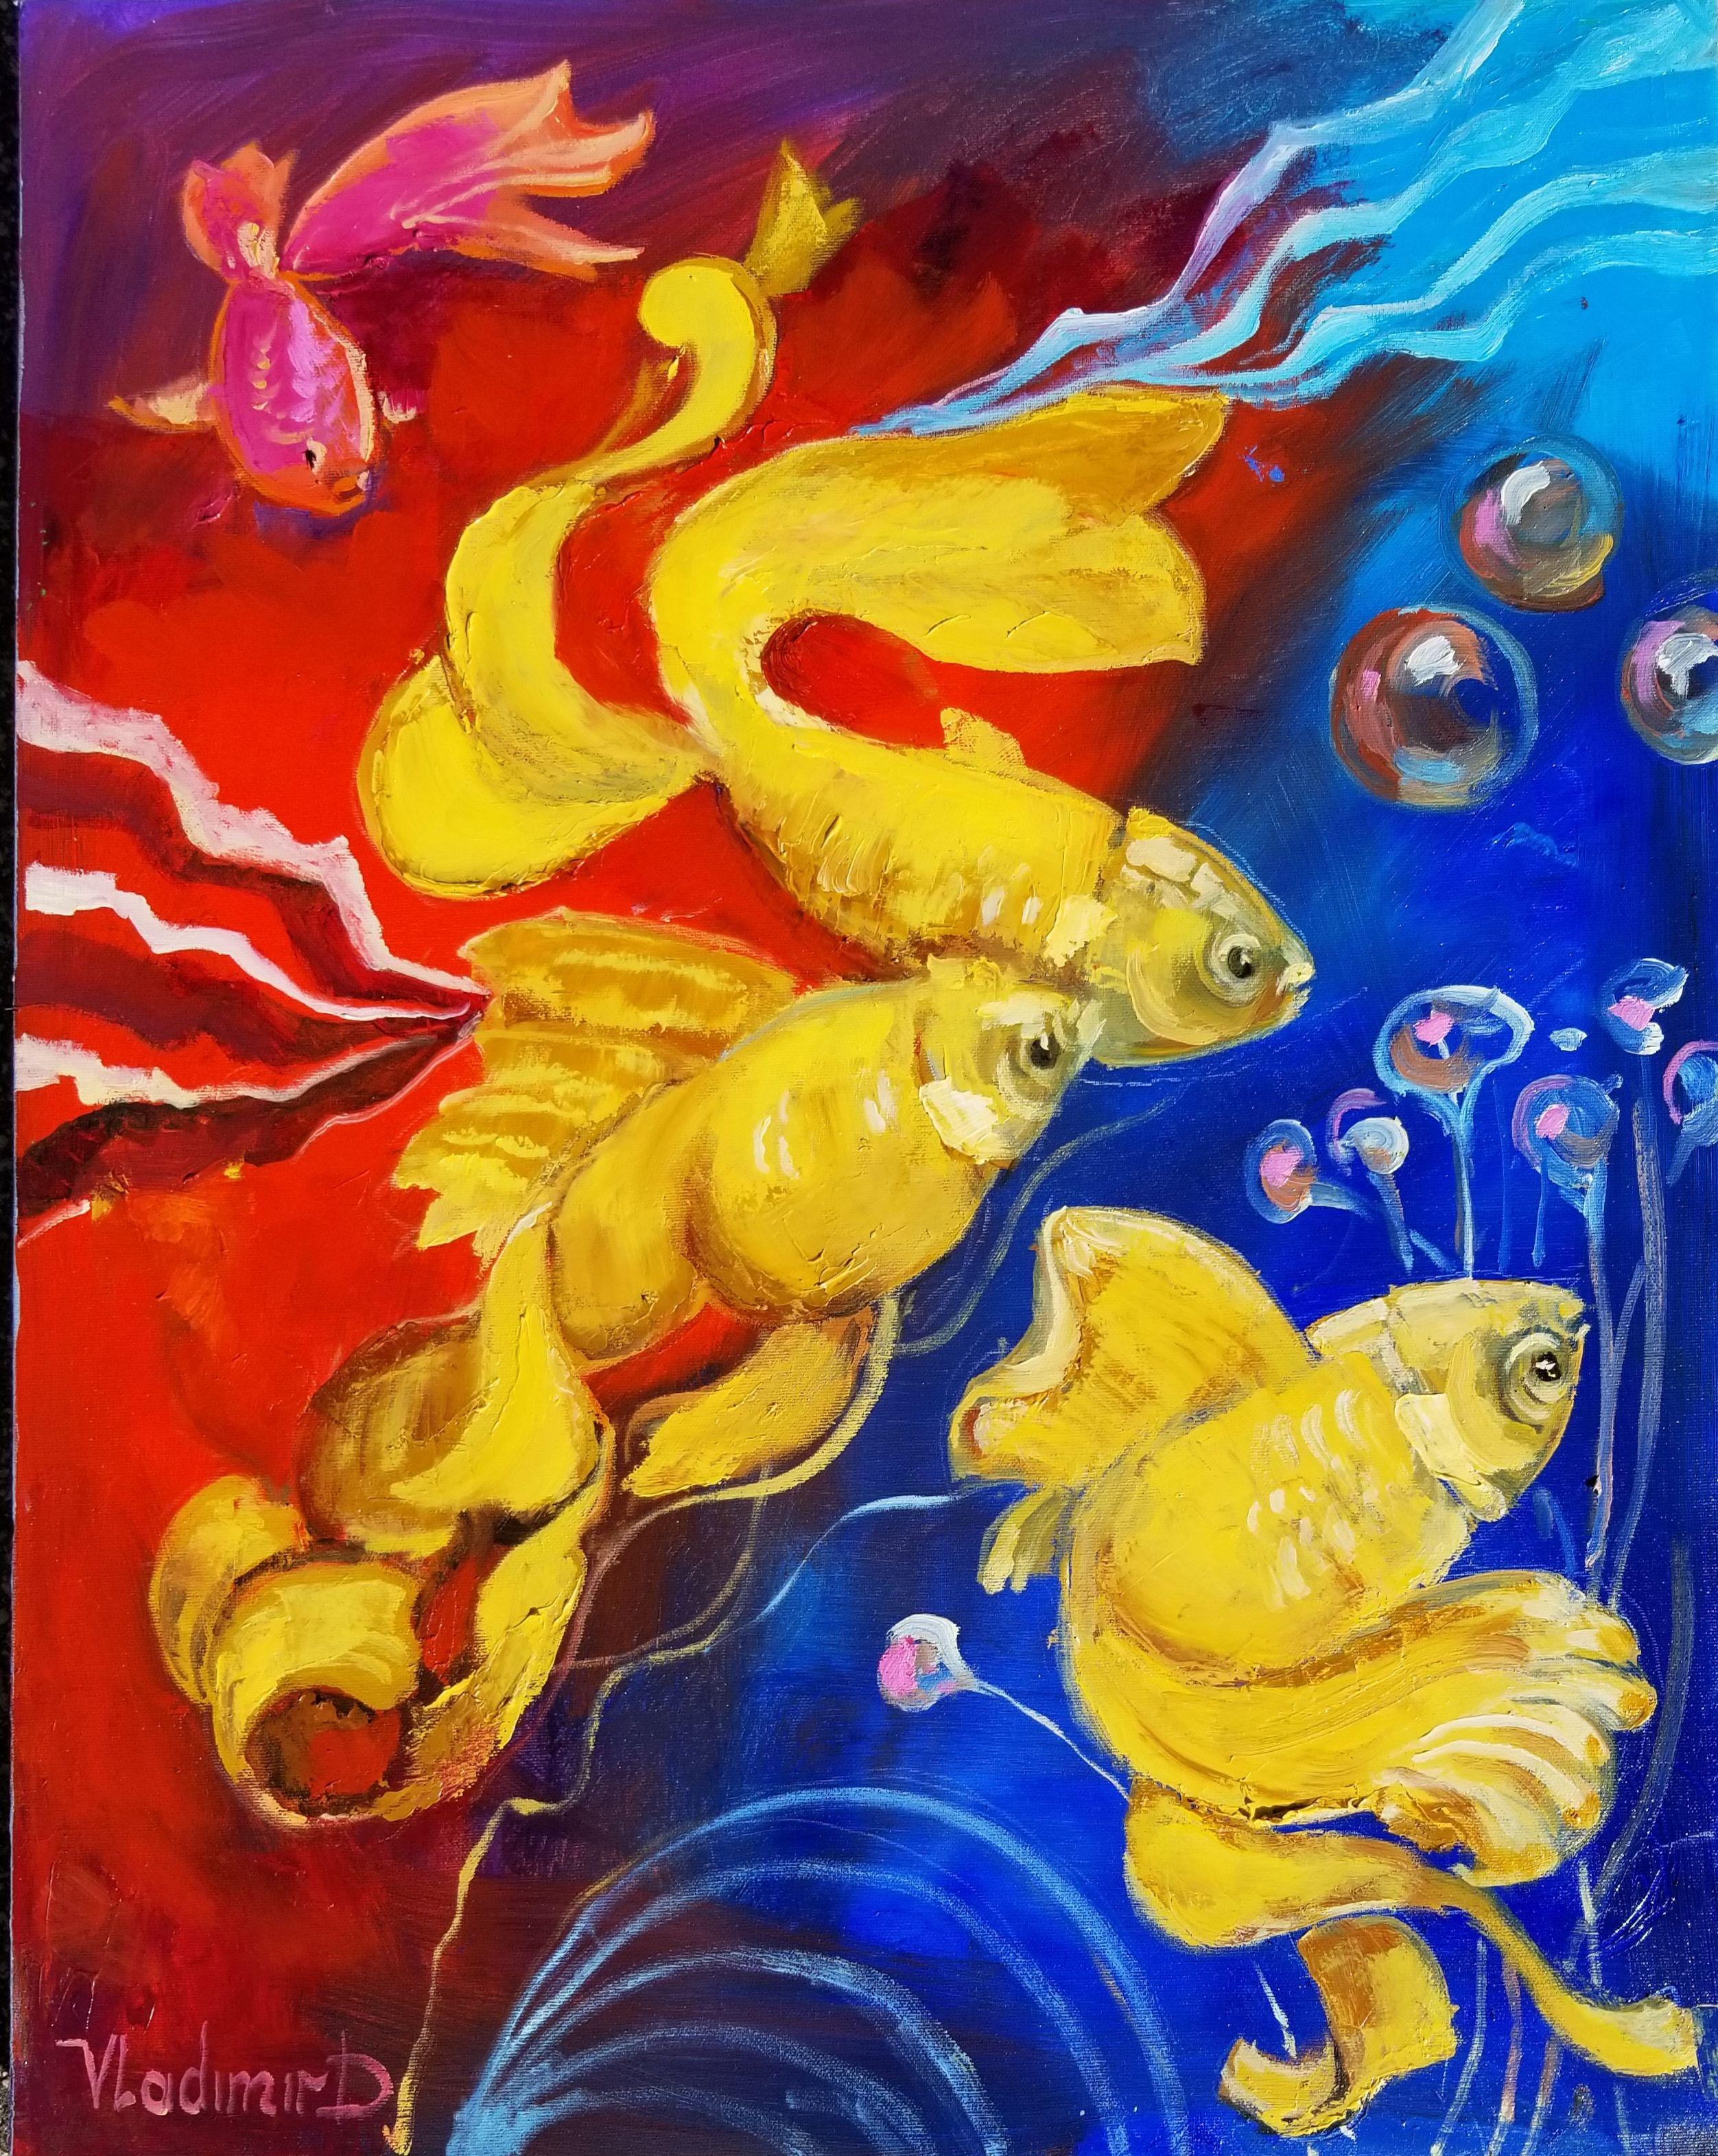 original contemporary oil painting on canvas of golden fish palette knife technique, expressionism style.  This unique technique using a  palette knife creates a one of a kind painting providing great dimensions and depth that truly bring original